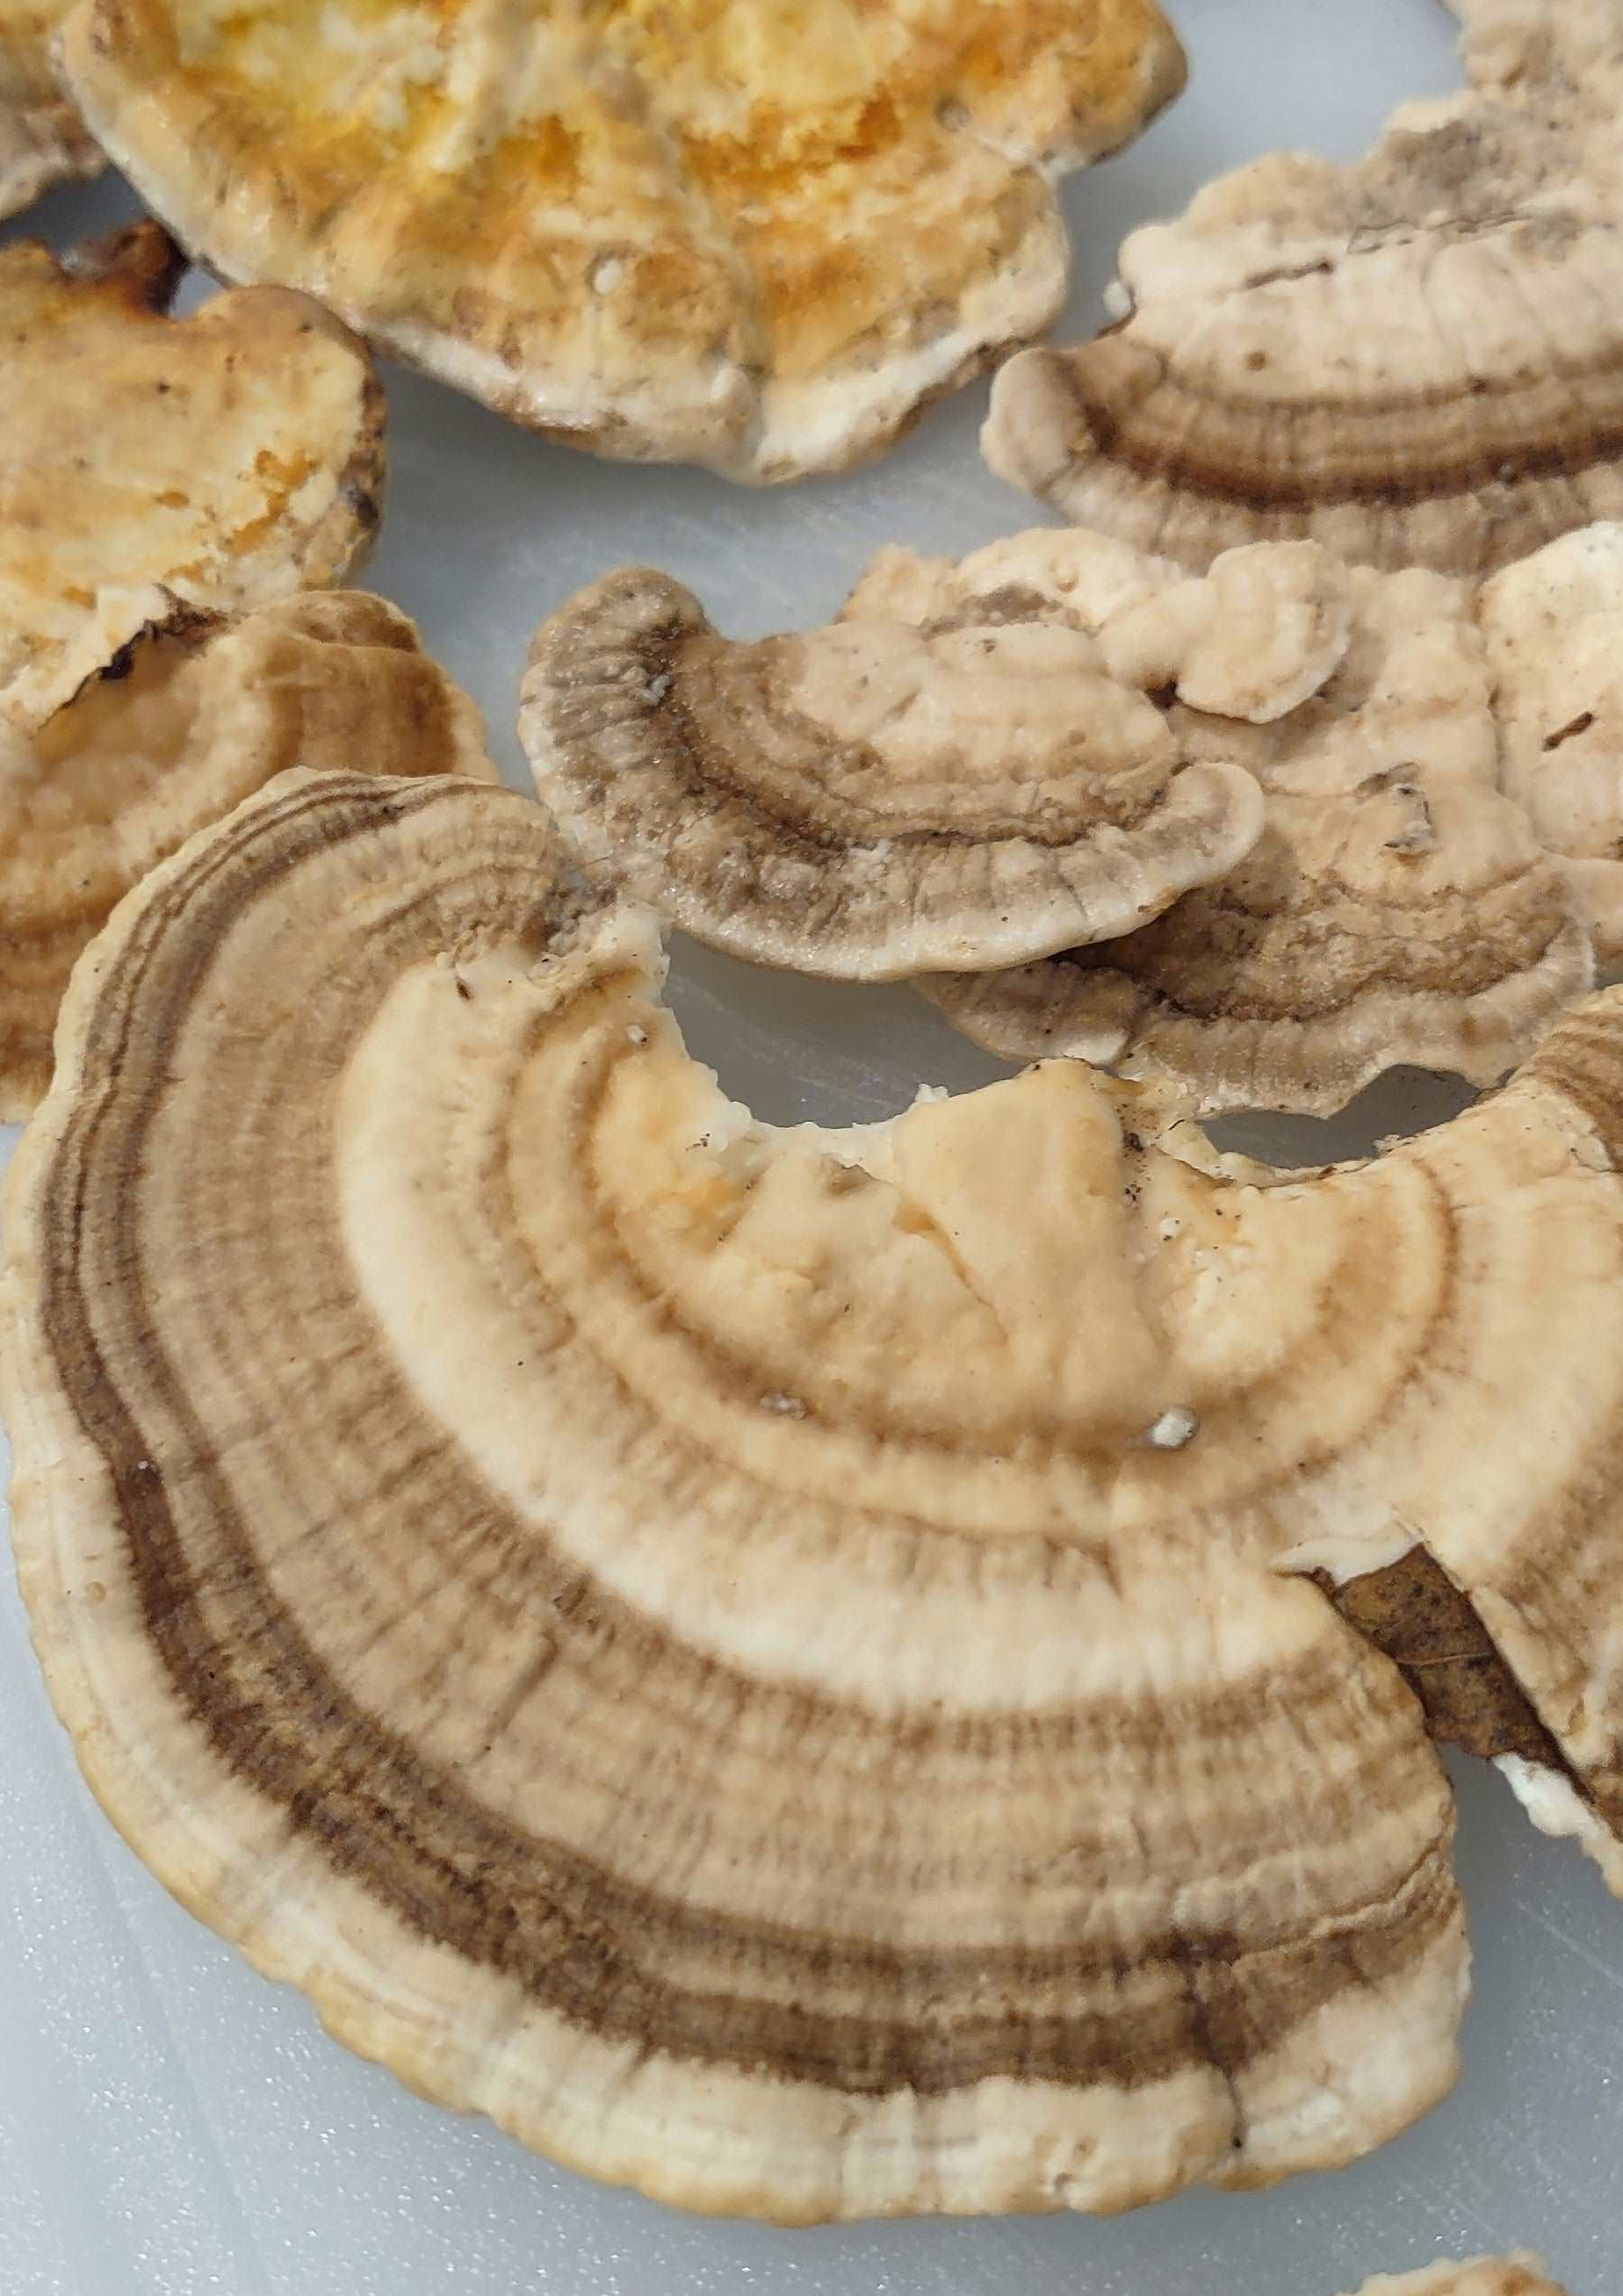 TURKEY TAIL MUSHROOM - DRIED - HARVESTED FROM OUR LAND - Cold Creek Natural Farm